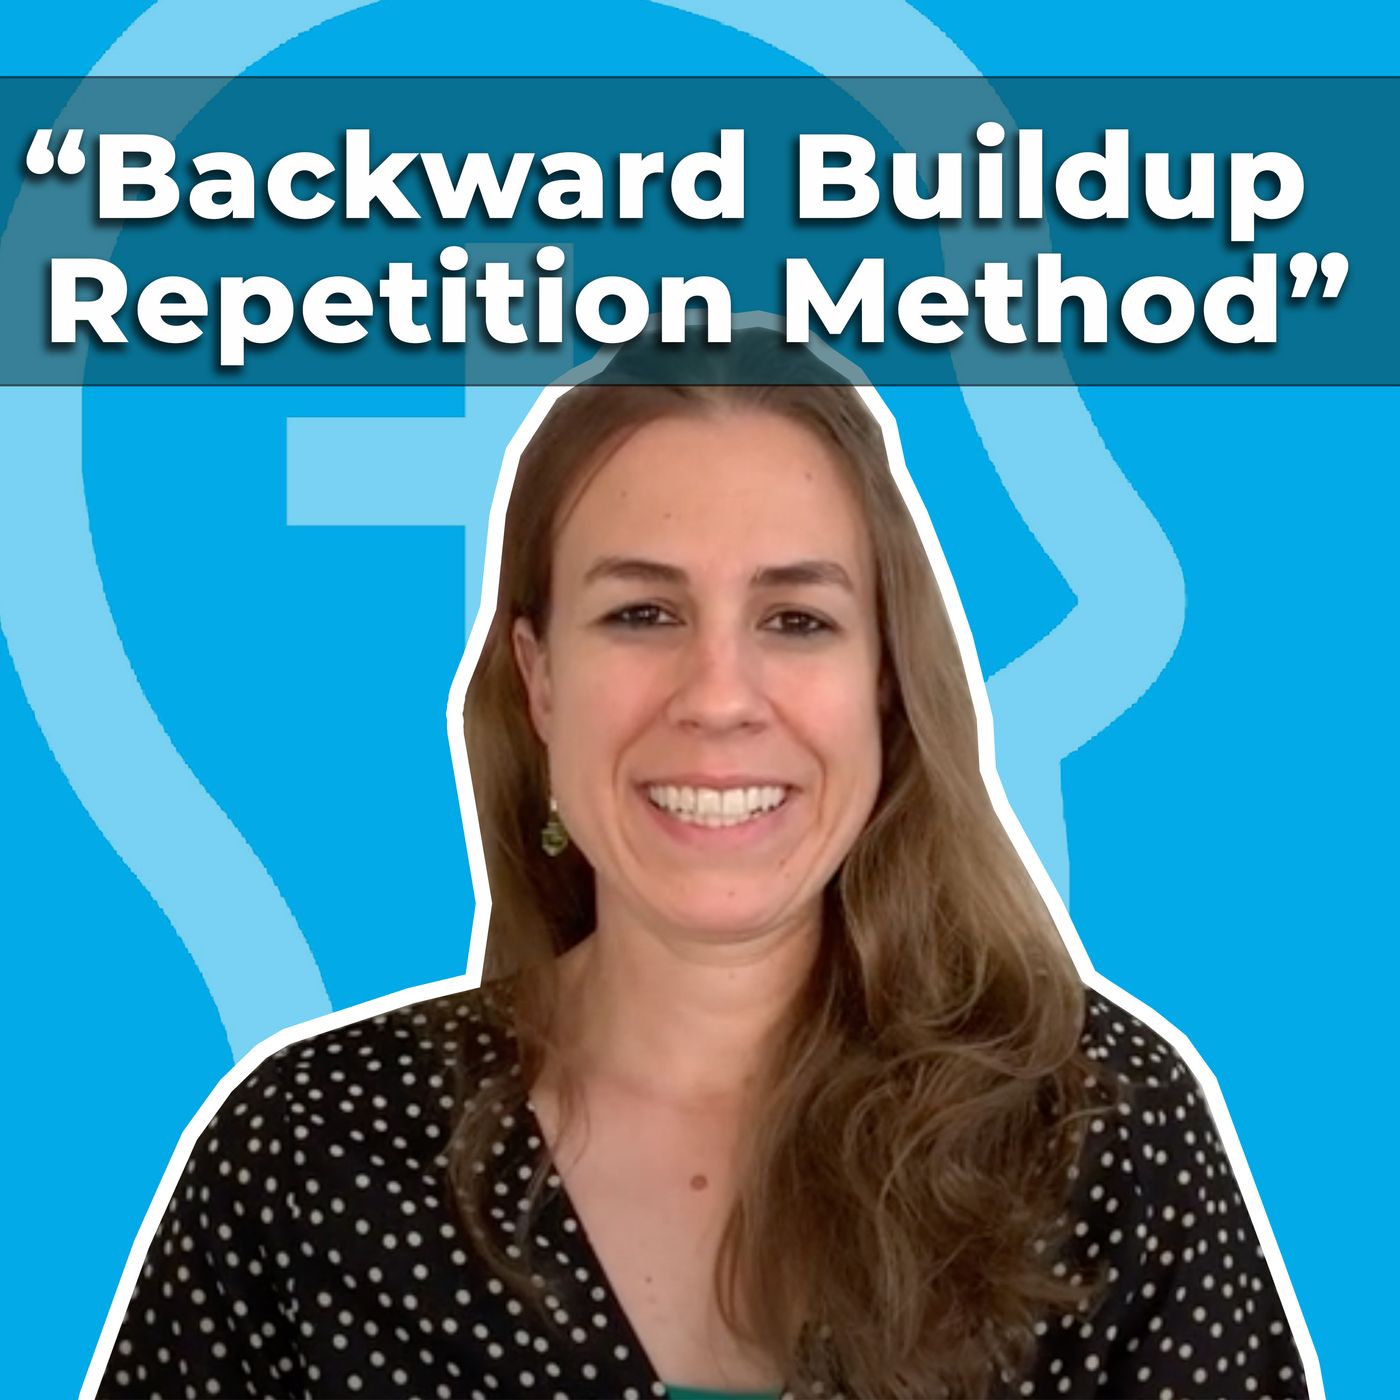 The New "Backward Buildup Repetition Method" for Bible Memory (does it work?)